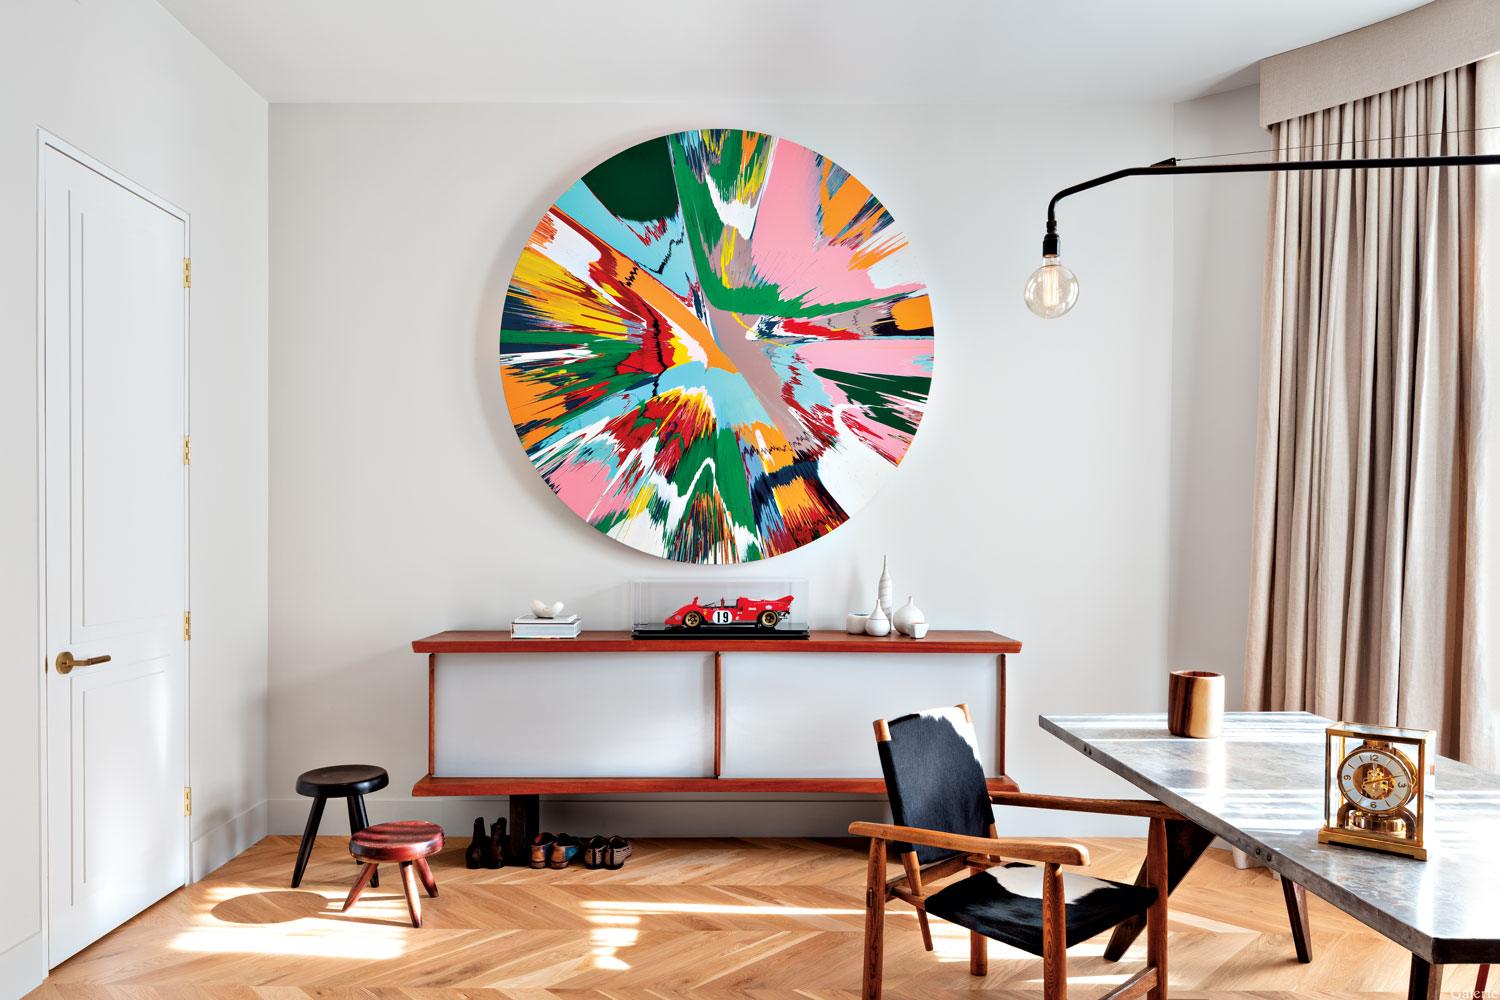 A Damien Hirst spin painting in Tina Kim’s Upper West Side townhouse.